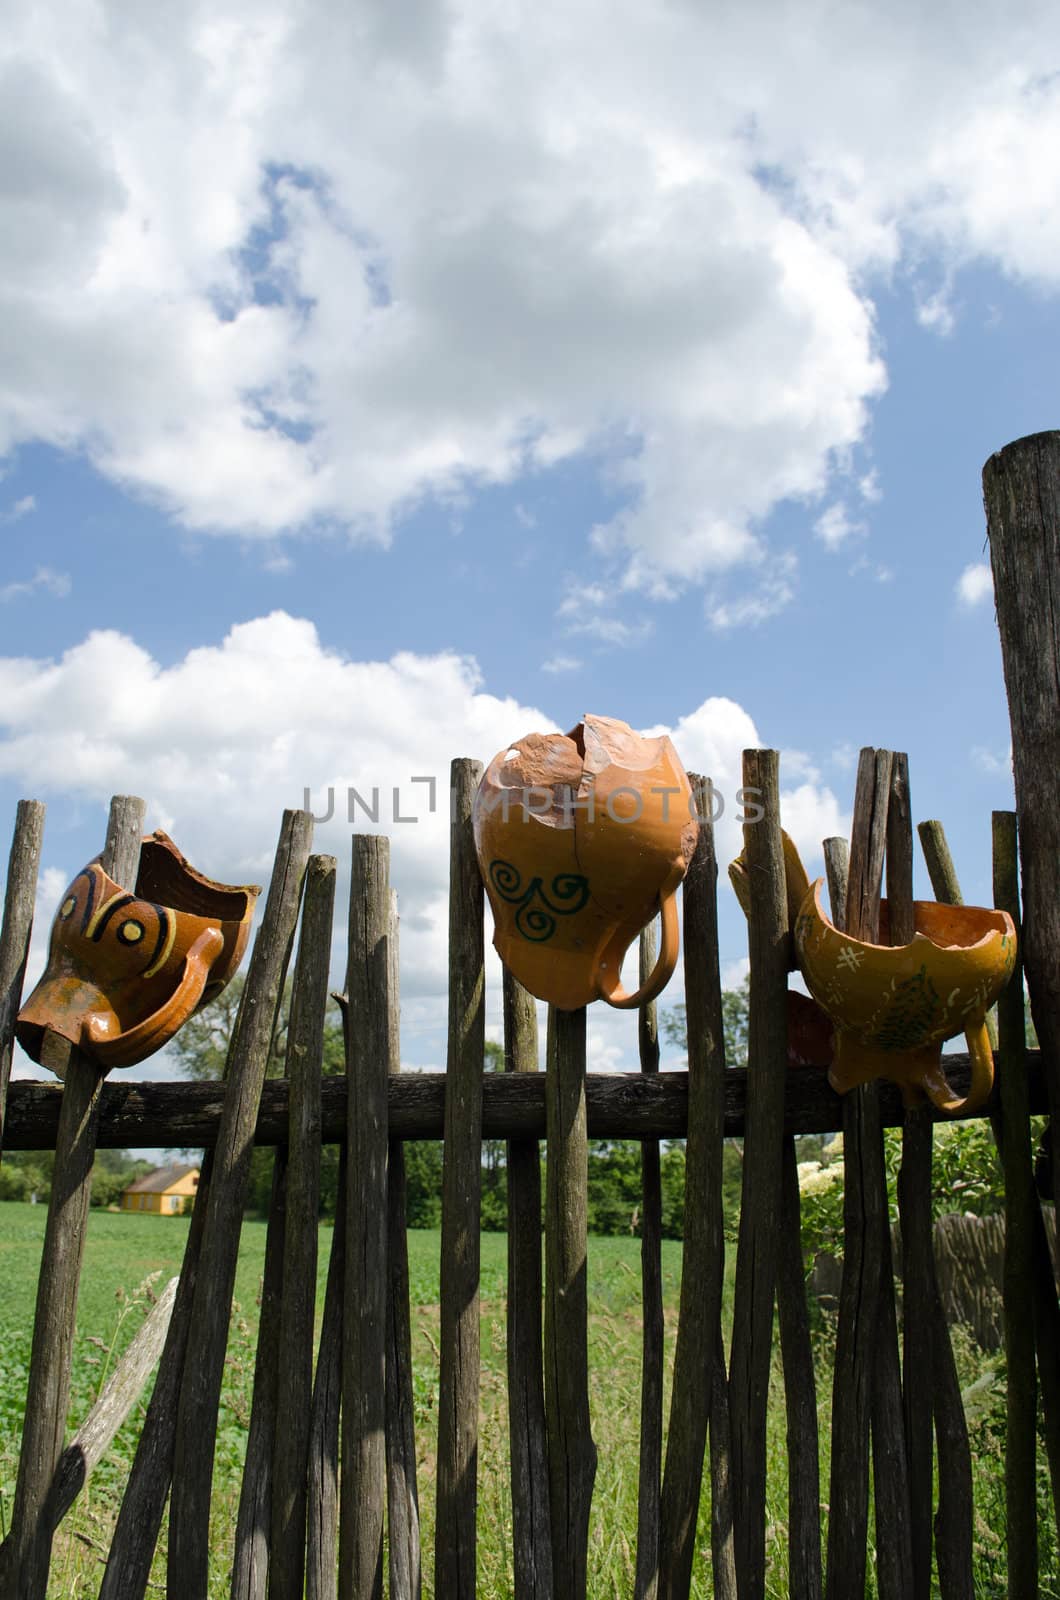 several clay broken pitchers hang on retro wooden fence from woven tree branches.